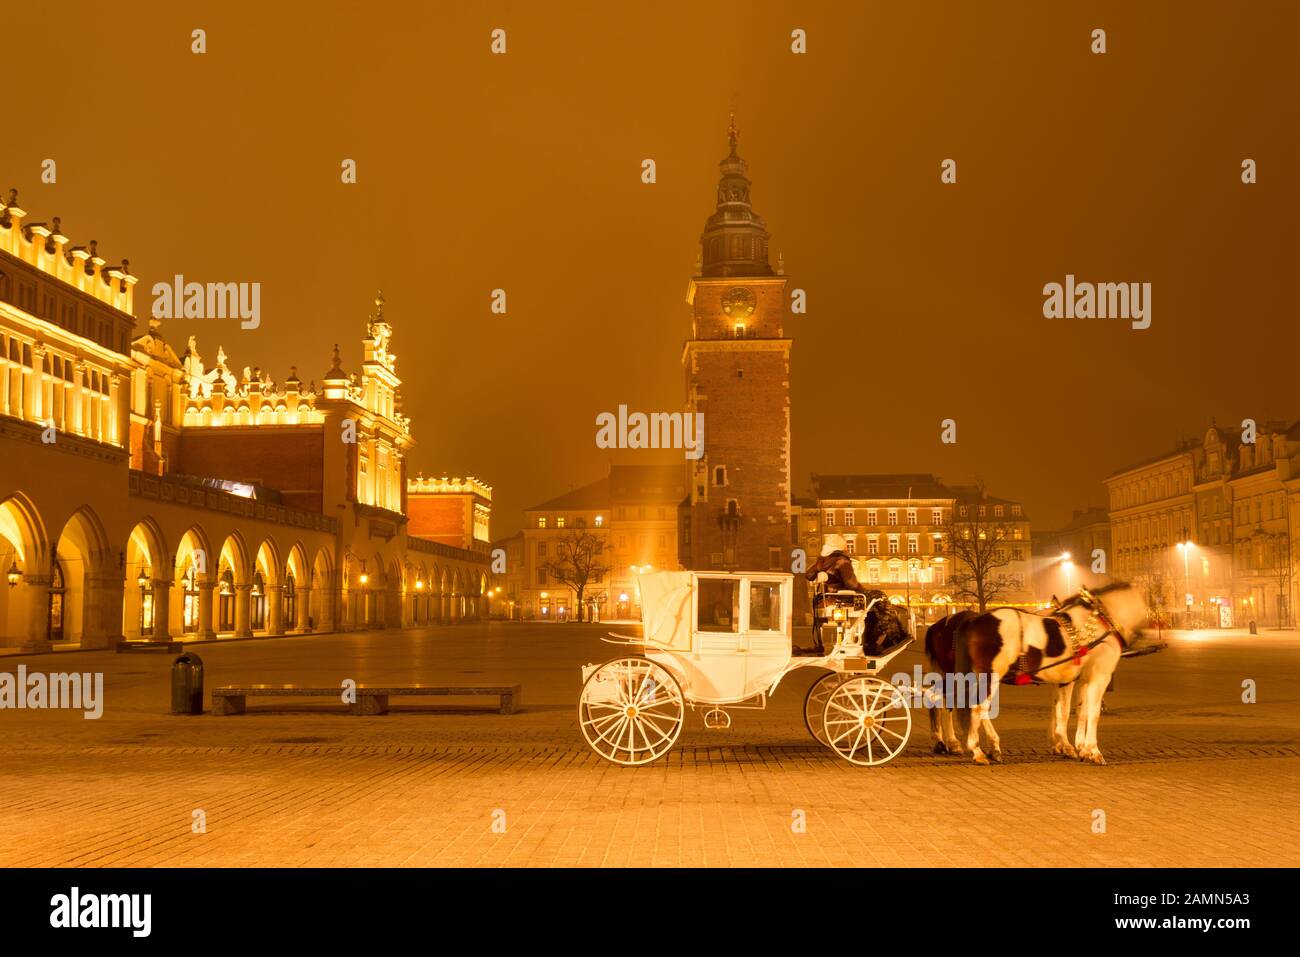 Horse-riding on Market Square in the evening, historical Krakow, Poland Stock Photo